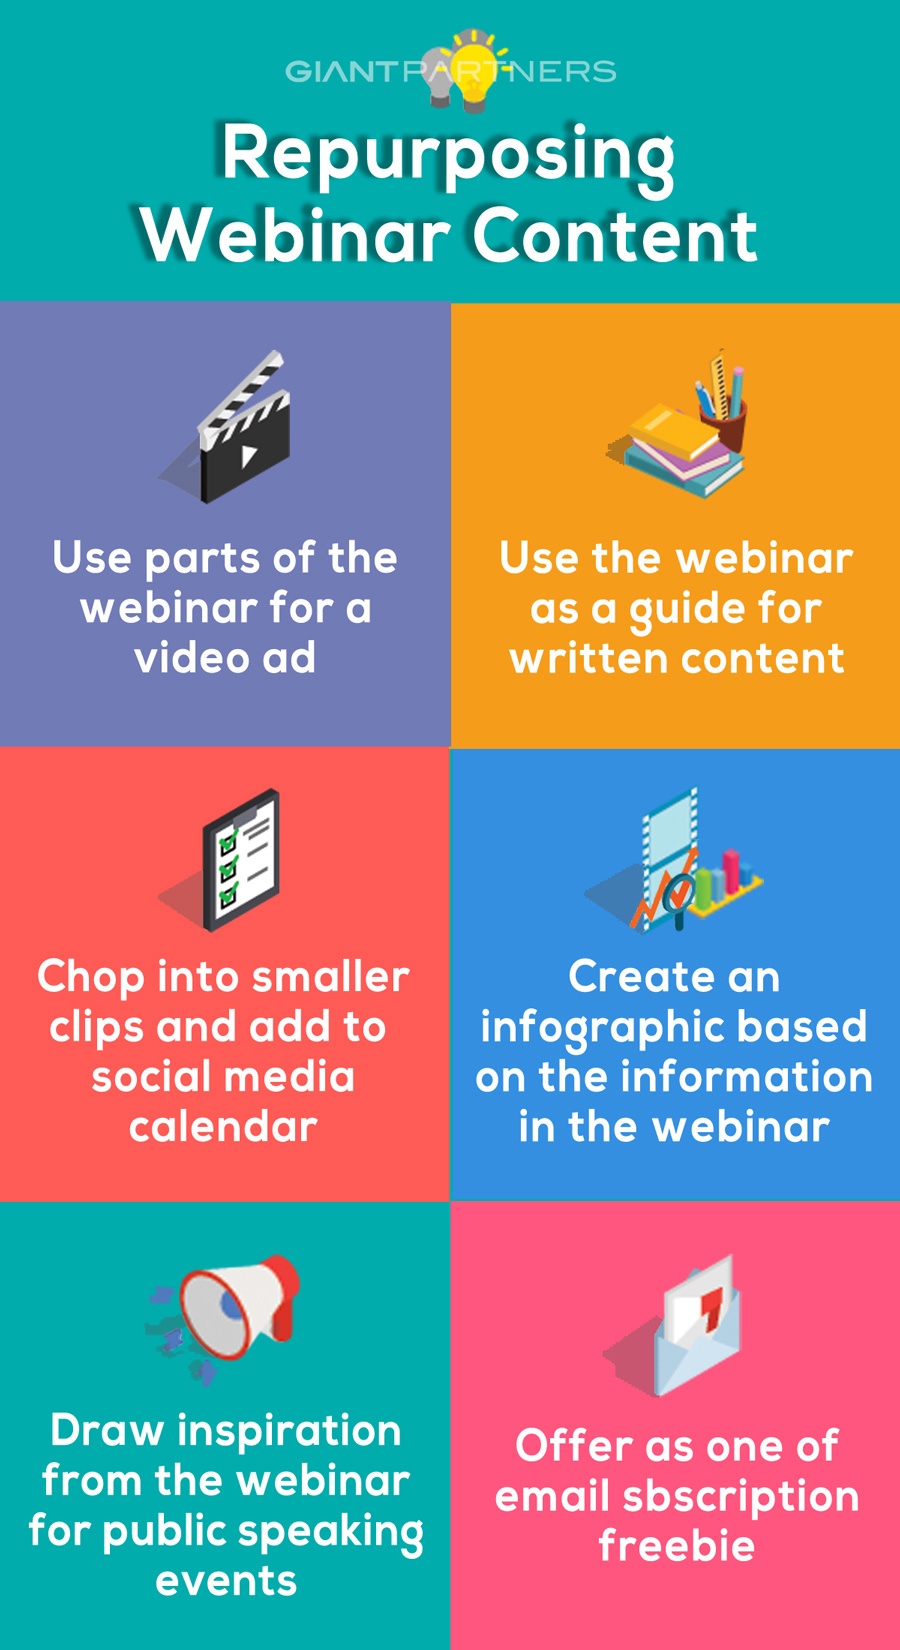 An infographic summarizing the tips from Giant Partners' linked article on repurposing webinar content.